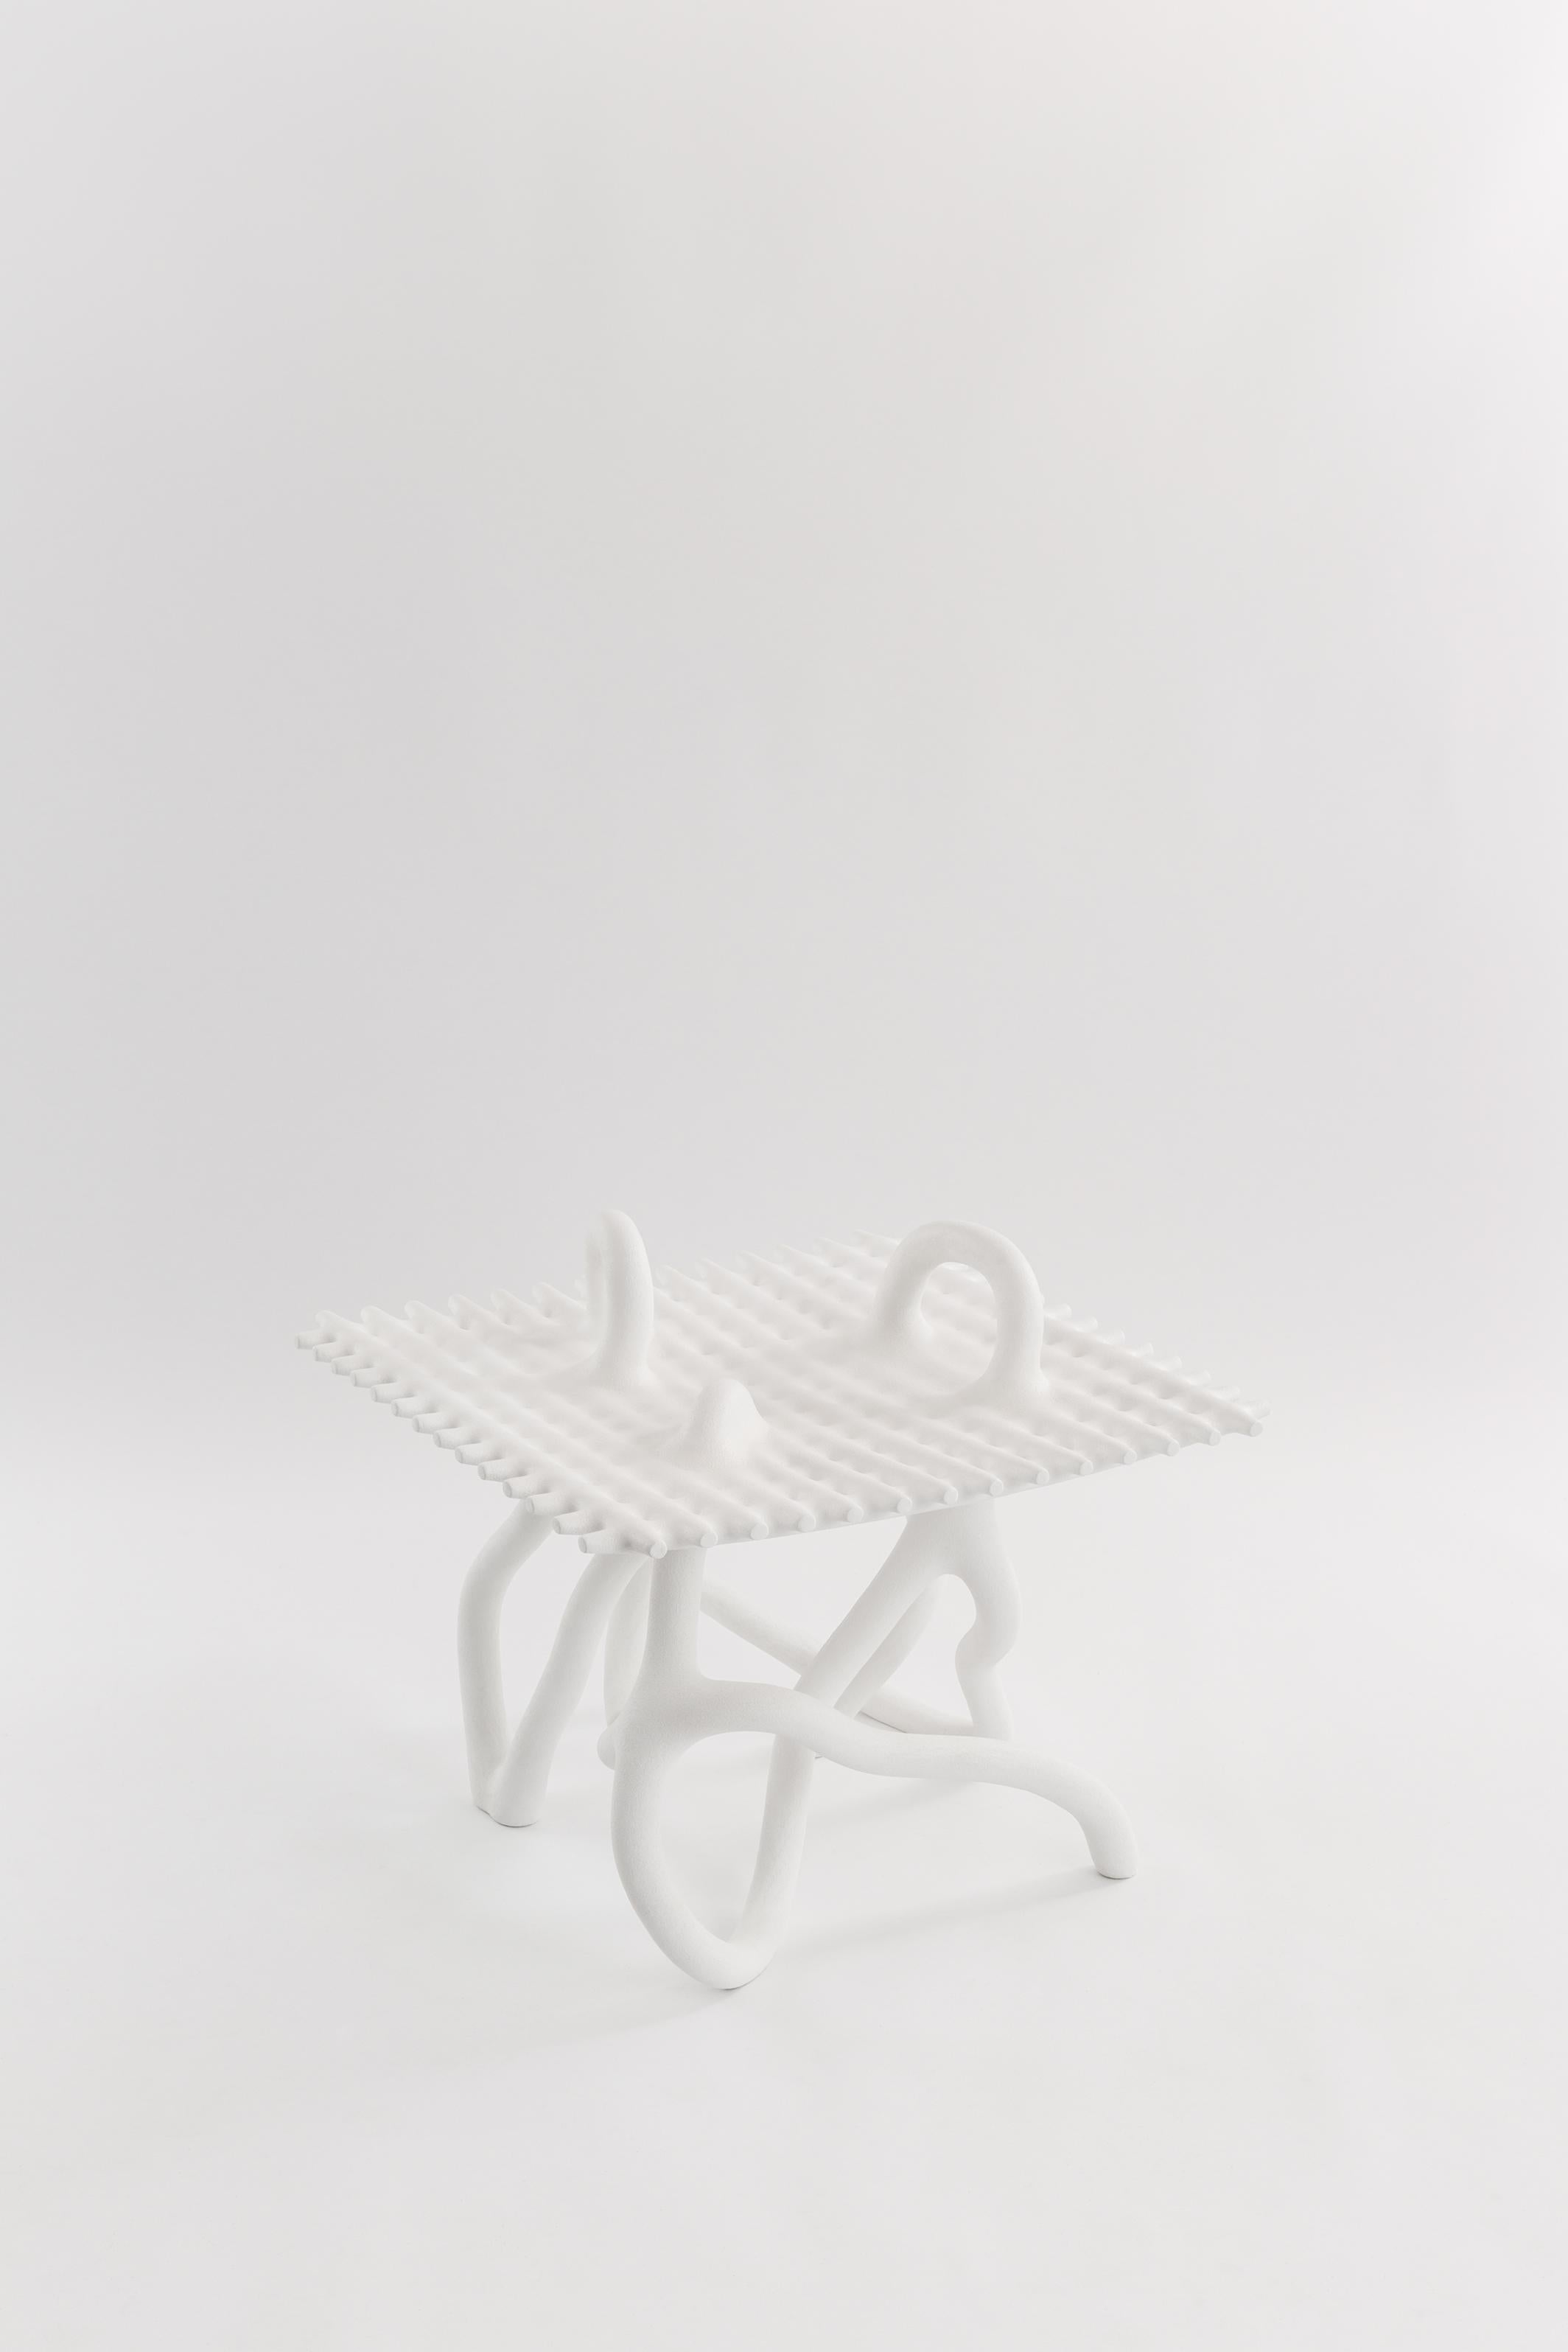 Random table on Grid by HWE
Limited Edition
Materials: Waste SLS 3D nylon powder, sand from sustainable sources
Dimensions: L 65 x W 65 x H 60 cm 
Colour: white

Hot Wire Extensions is a young sustainable design brand, presenting a bold innovative